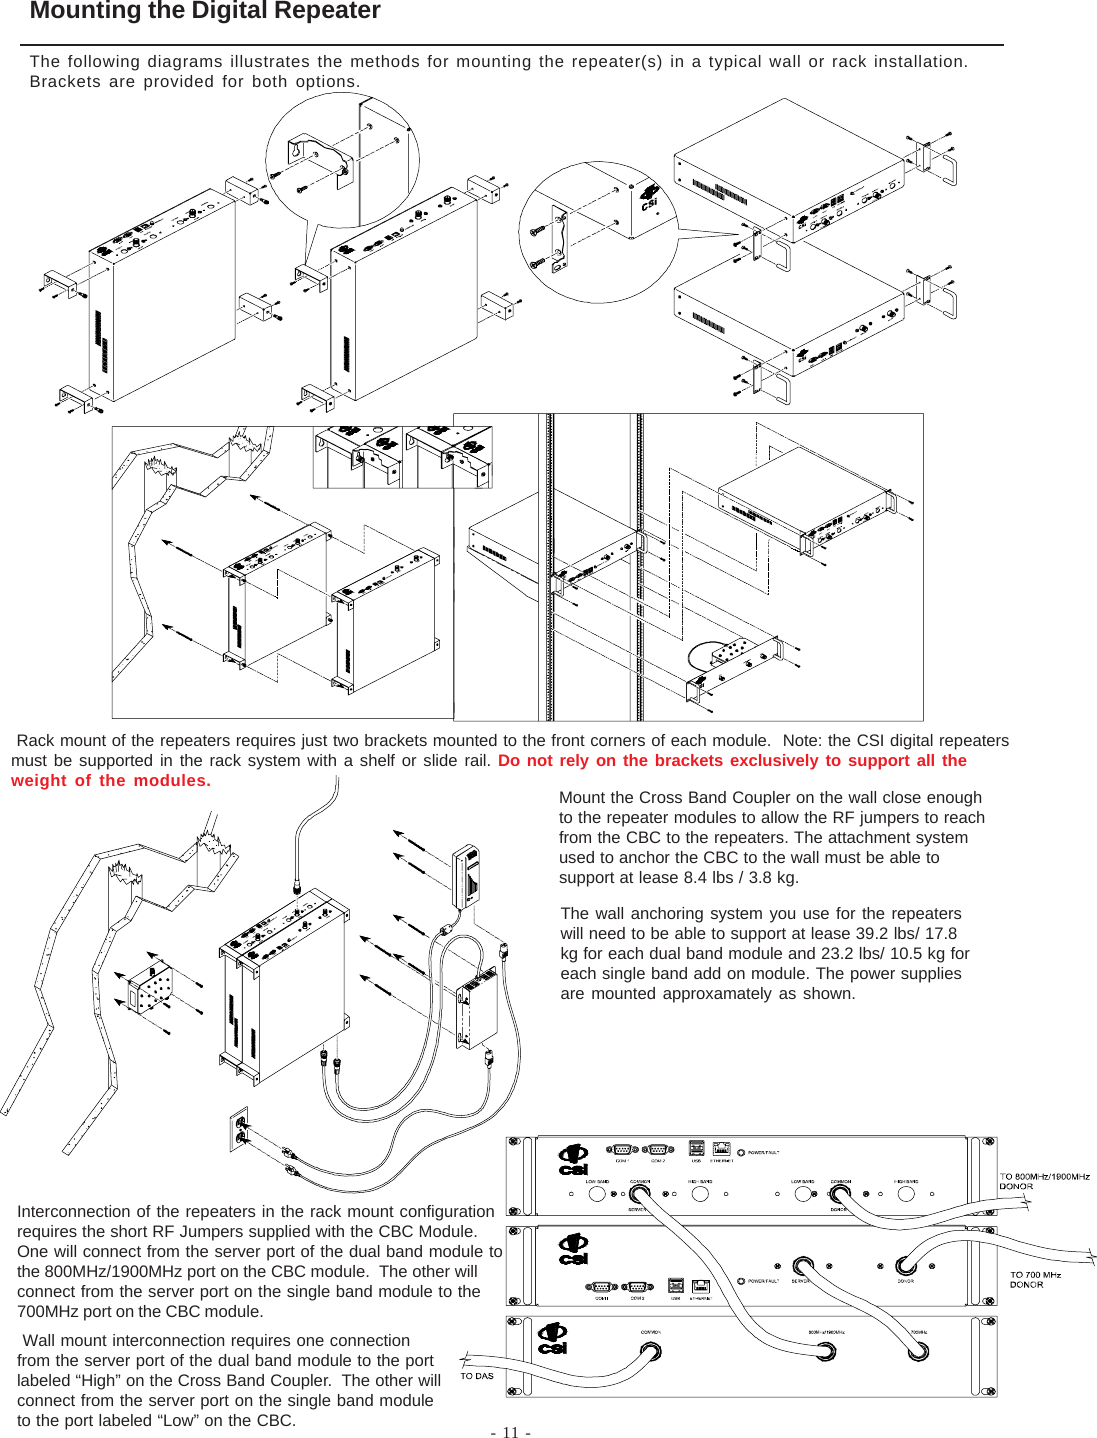 - 11 -Mounting the Digital RepeaterThe following diagrams illustrates the methods for mounting the repeater(s) in a typical wall or rack installation.Brackets are provided for both options. Rack mount of the repeaters requires just two brackets mounted to the front corners of each module.  Note: the CSI digital repeatersmust be supported in the rack system with a shelf or slide rail. Do not rely on the brackets exclusively to support all theweight of the modules. Mount the Cross Band Coupler on the wall close enoughto the repeater modules to allow the RF jumpers to reachfrom the CBC to the repeaters. The attachment systemused to anchor the CBC to the wall must be able tosupport at lease 8.4 lbs / 3.8 kg.The wall anchoring system you use for the repeaterswill need to be able to support at lease 39.2 lbs/ 17.8kg for each dual band module and 23.2 lbs/ 10.5 kg foreach single band add on module. The power suppliesare mounted approxamately as shown.Interconnection of the repeaters in the rack mount configurationrequires the short RF Jumpers supplied with the CBC Module.One will connect from the server port of the dual band module tothe 800MHz/1900MHz port on the CBC module.  The other willconnect from the server port on the single band module to the700MHz port on the CBC module. Wall mount interconnection requires one connectionfrom the server port of the dual band module to the portlabeled “High” on the Cross Band Coupler.  The other willconnect from the server port on the single band moduleto the port labeled “Low” on the CBC.